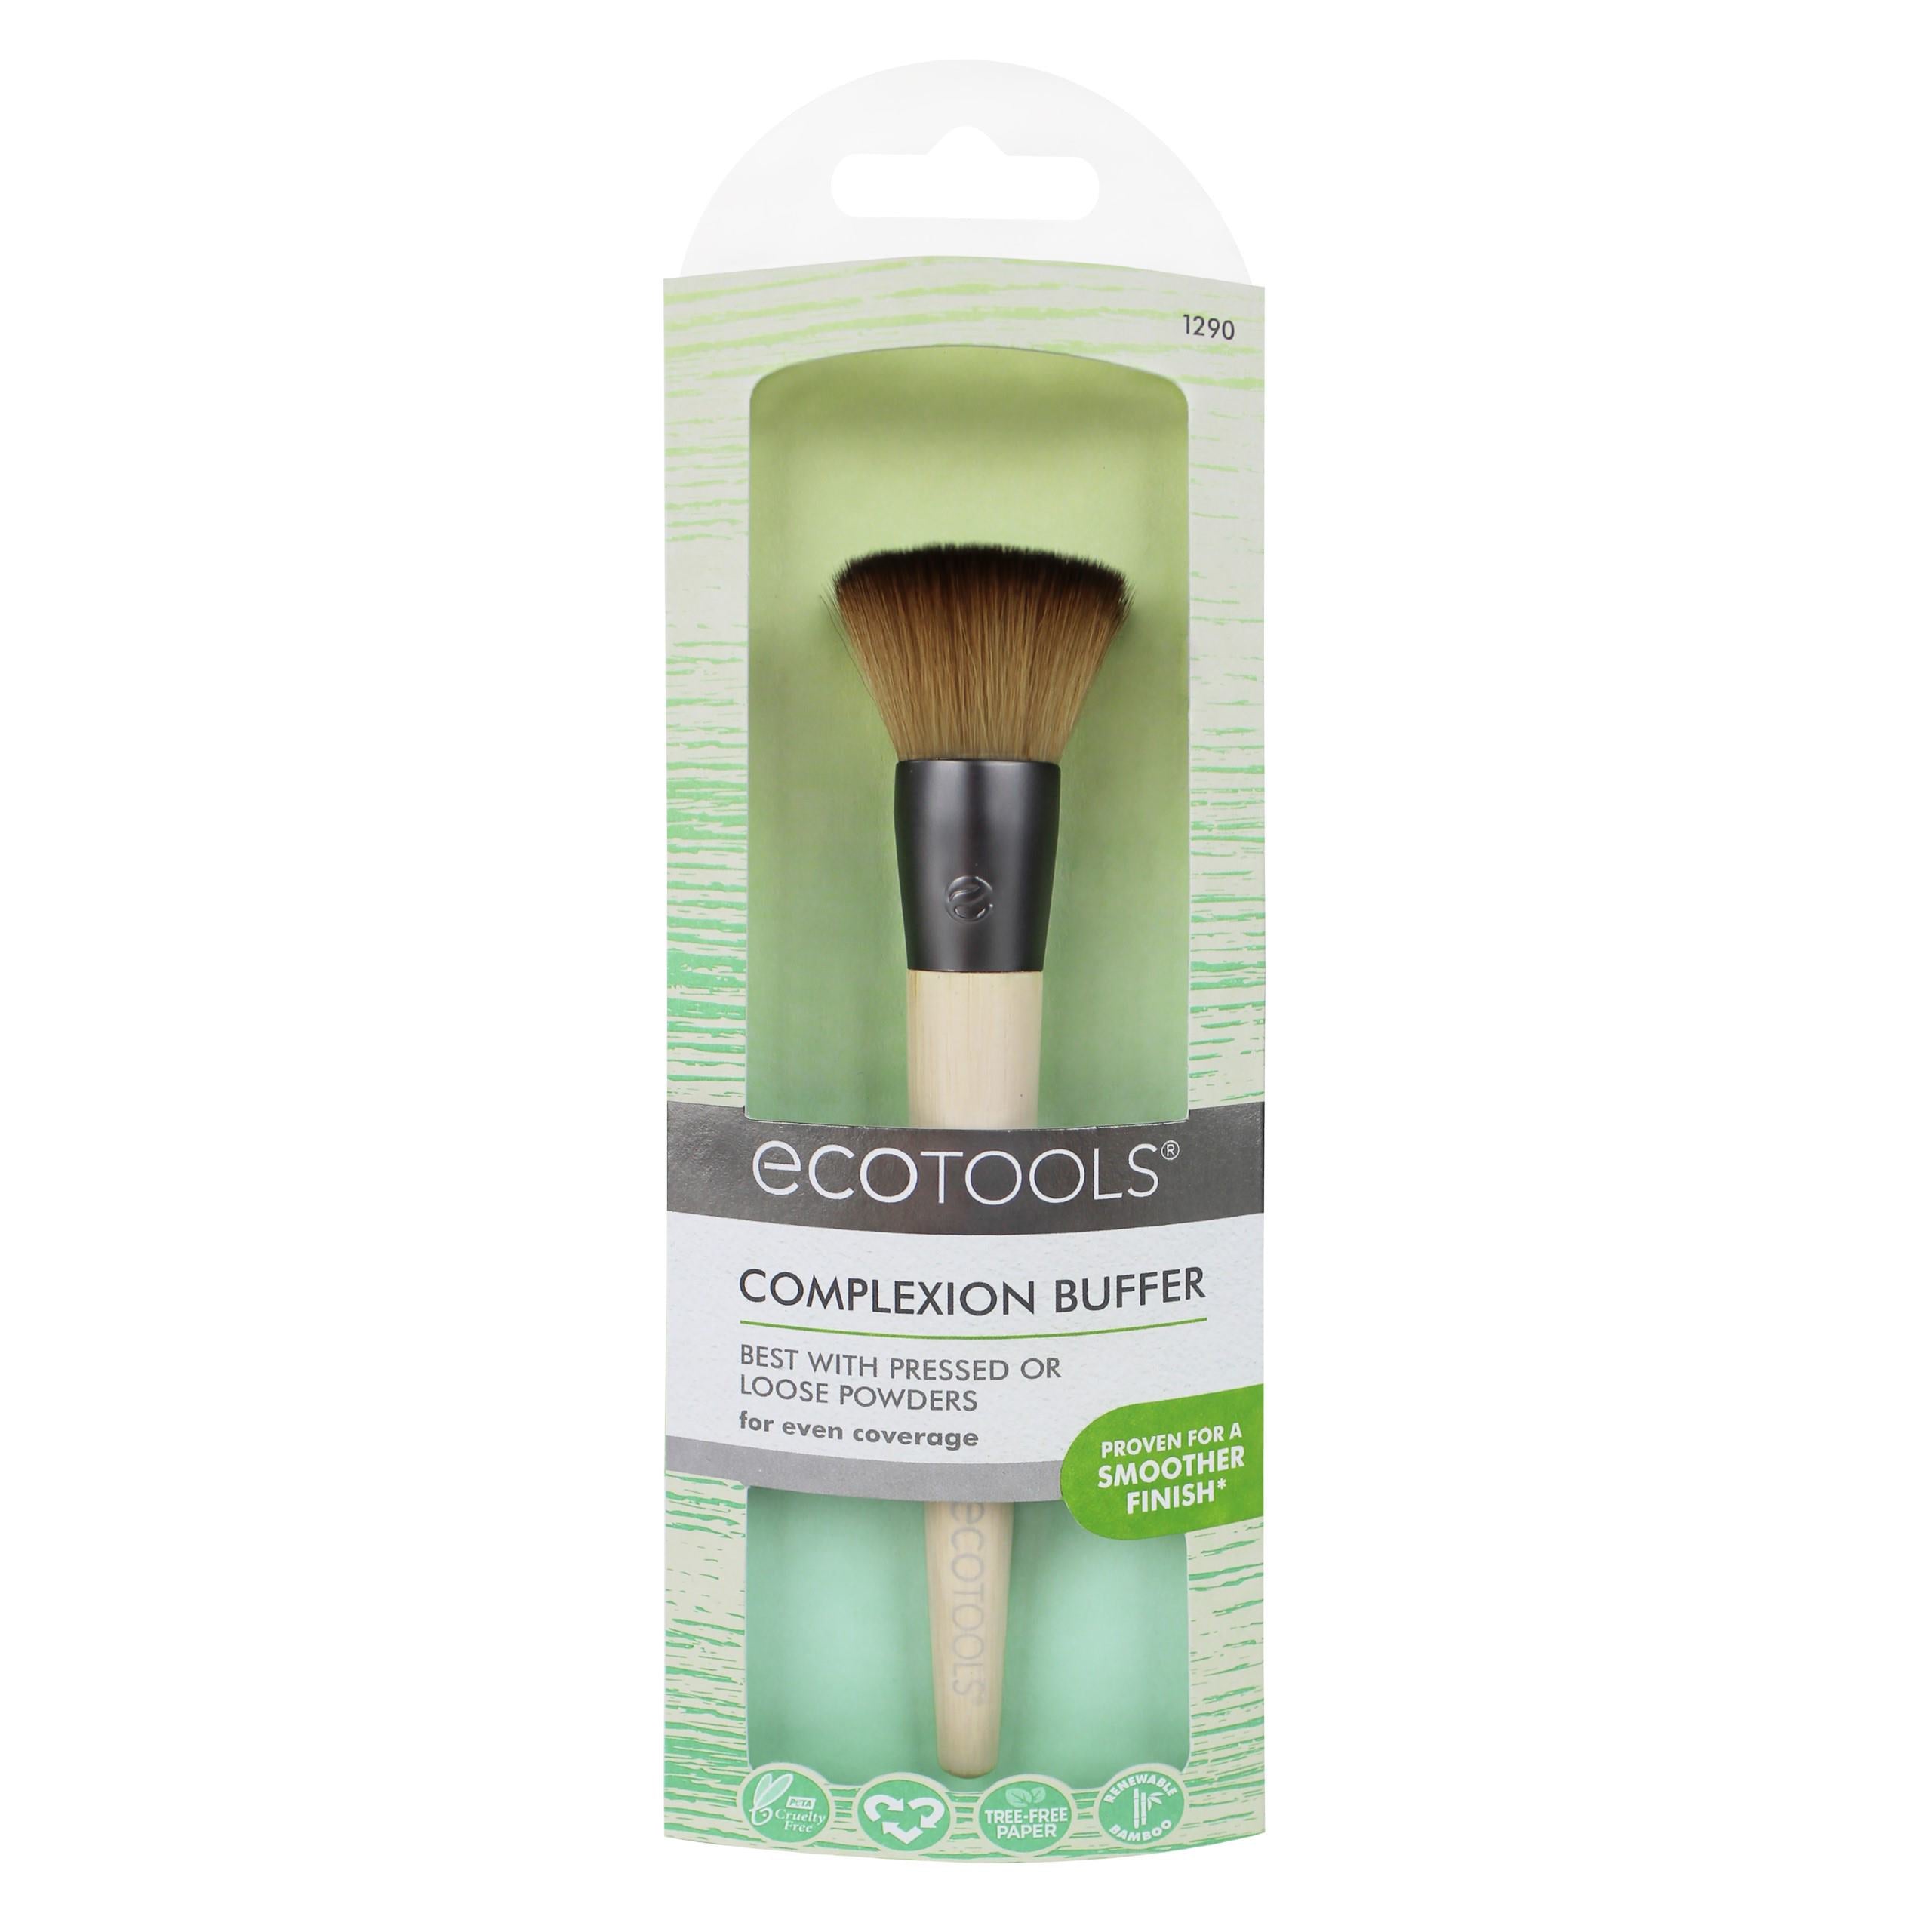 ecoTOOLS #1290 Complexion Buffer Brush